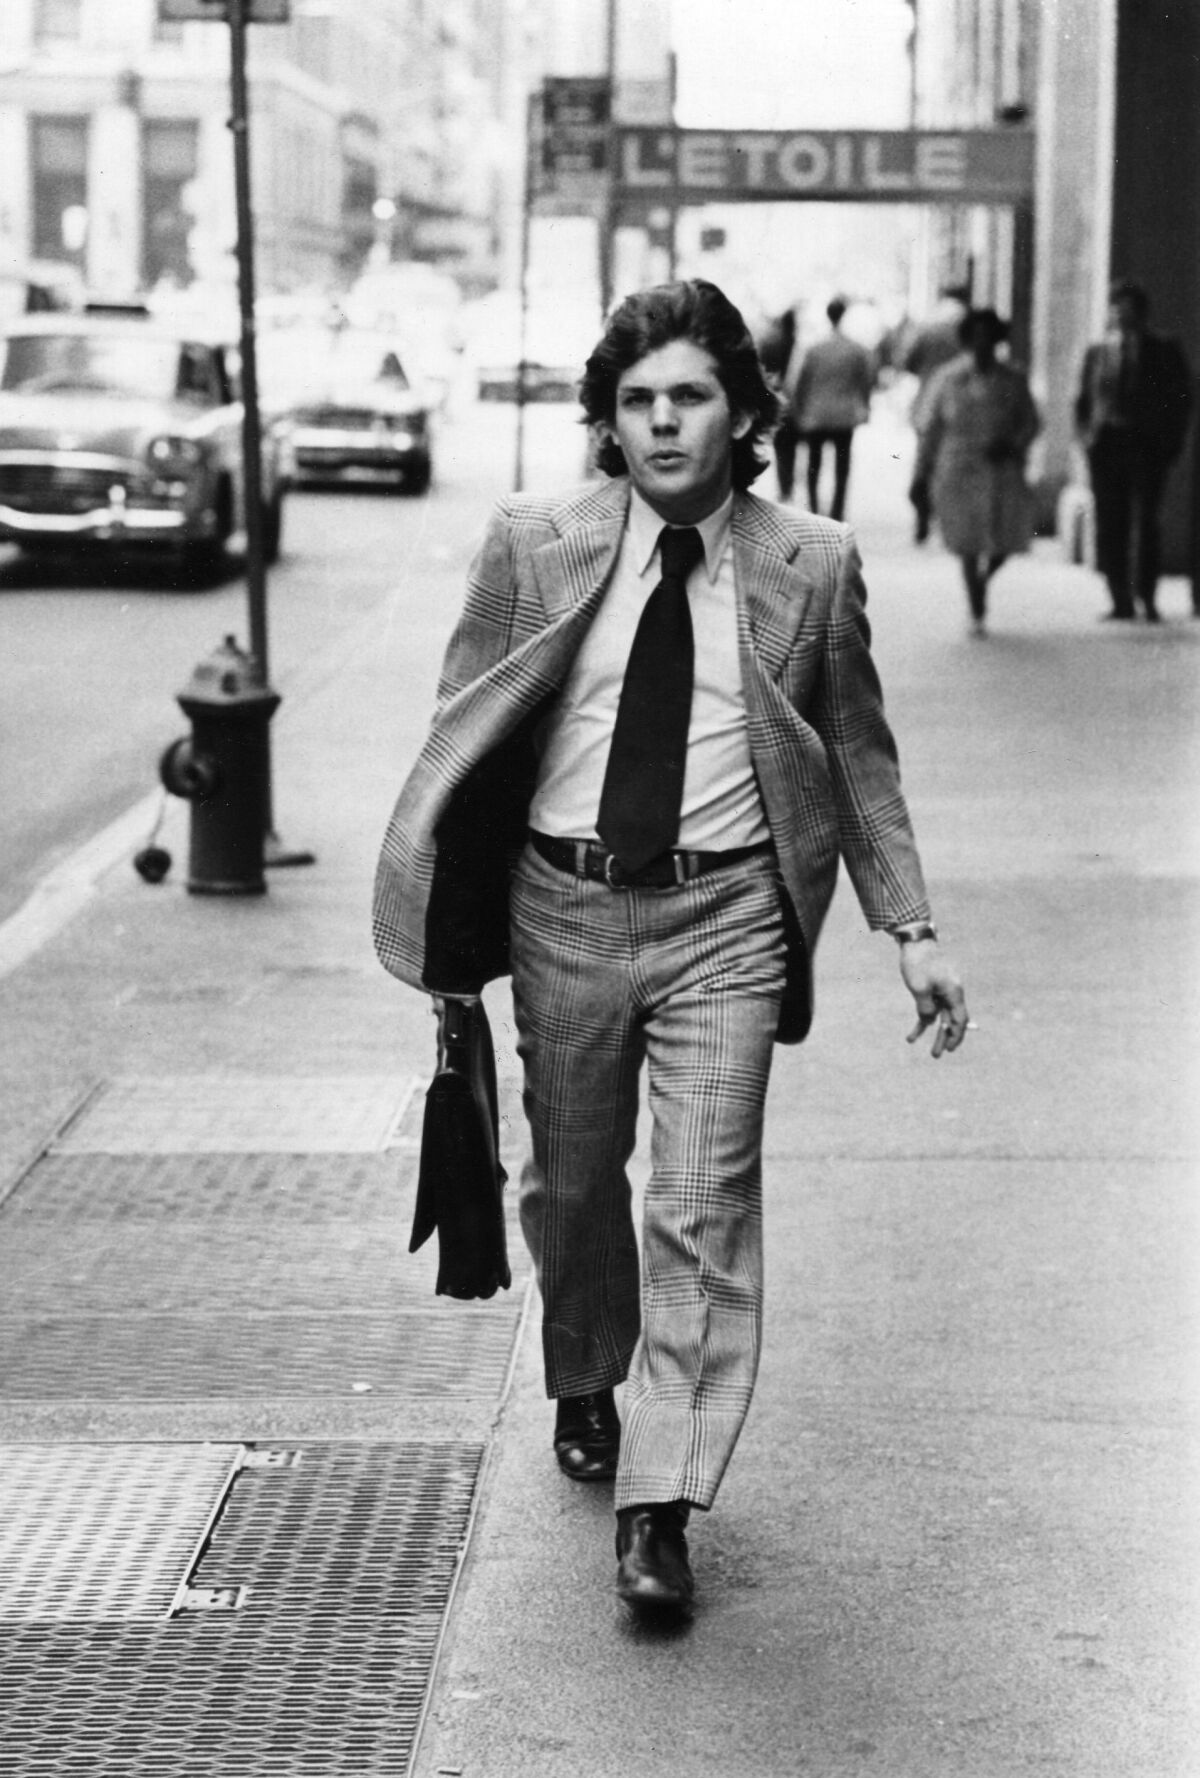 Black and white photo of a man in a suit walking in a city 